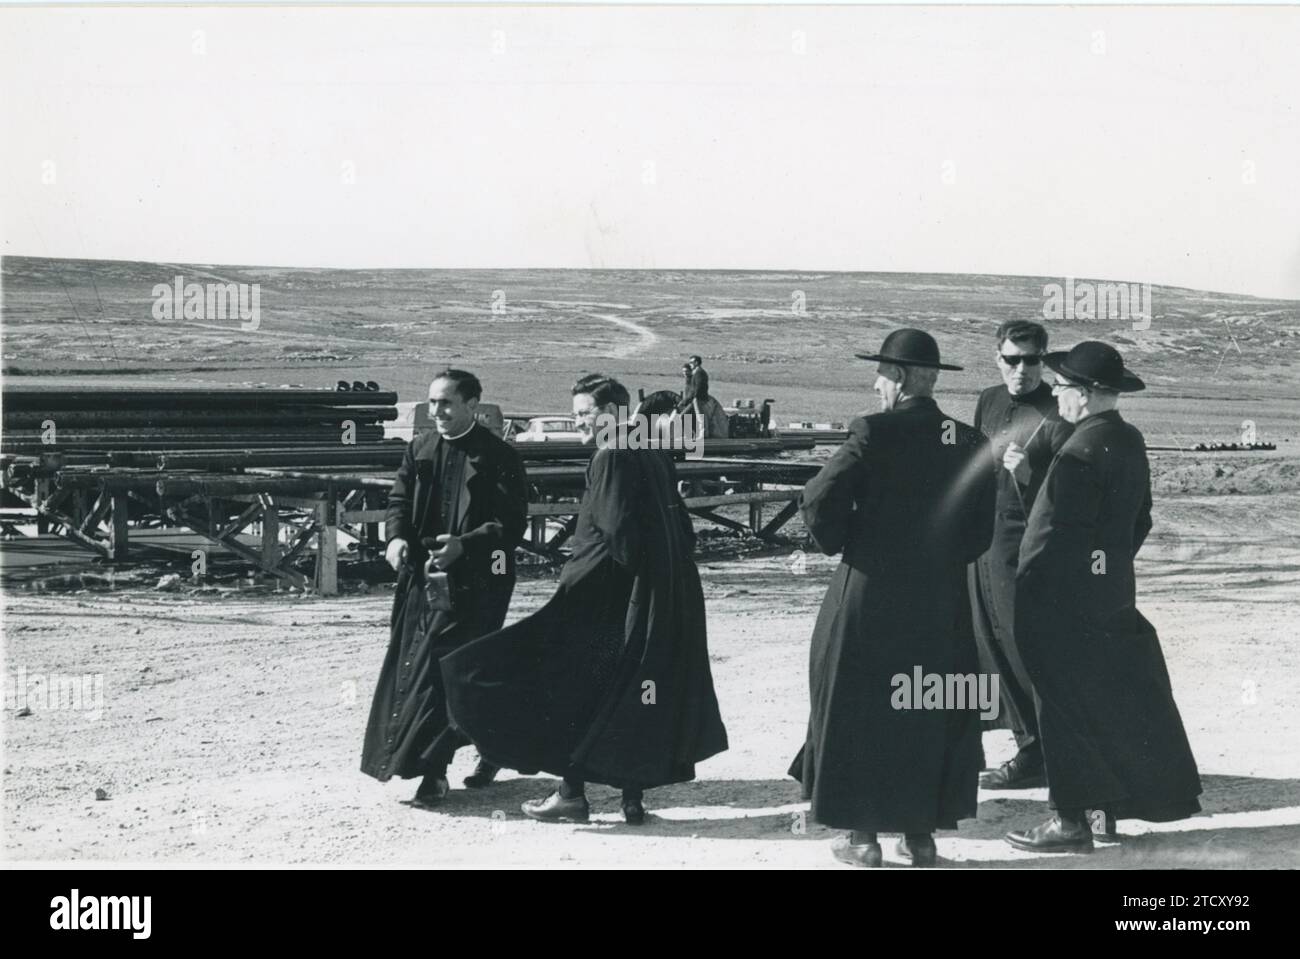 Valdeajos. The dream of black gold. On June 6, 1964, the discovery of an oil field in the Páramo de La Lora in Burgos was announced. In the photograph, some priests from the region on the prospecting grounds. Credit: Album / Archivo ABC Stock Photo